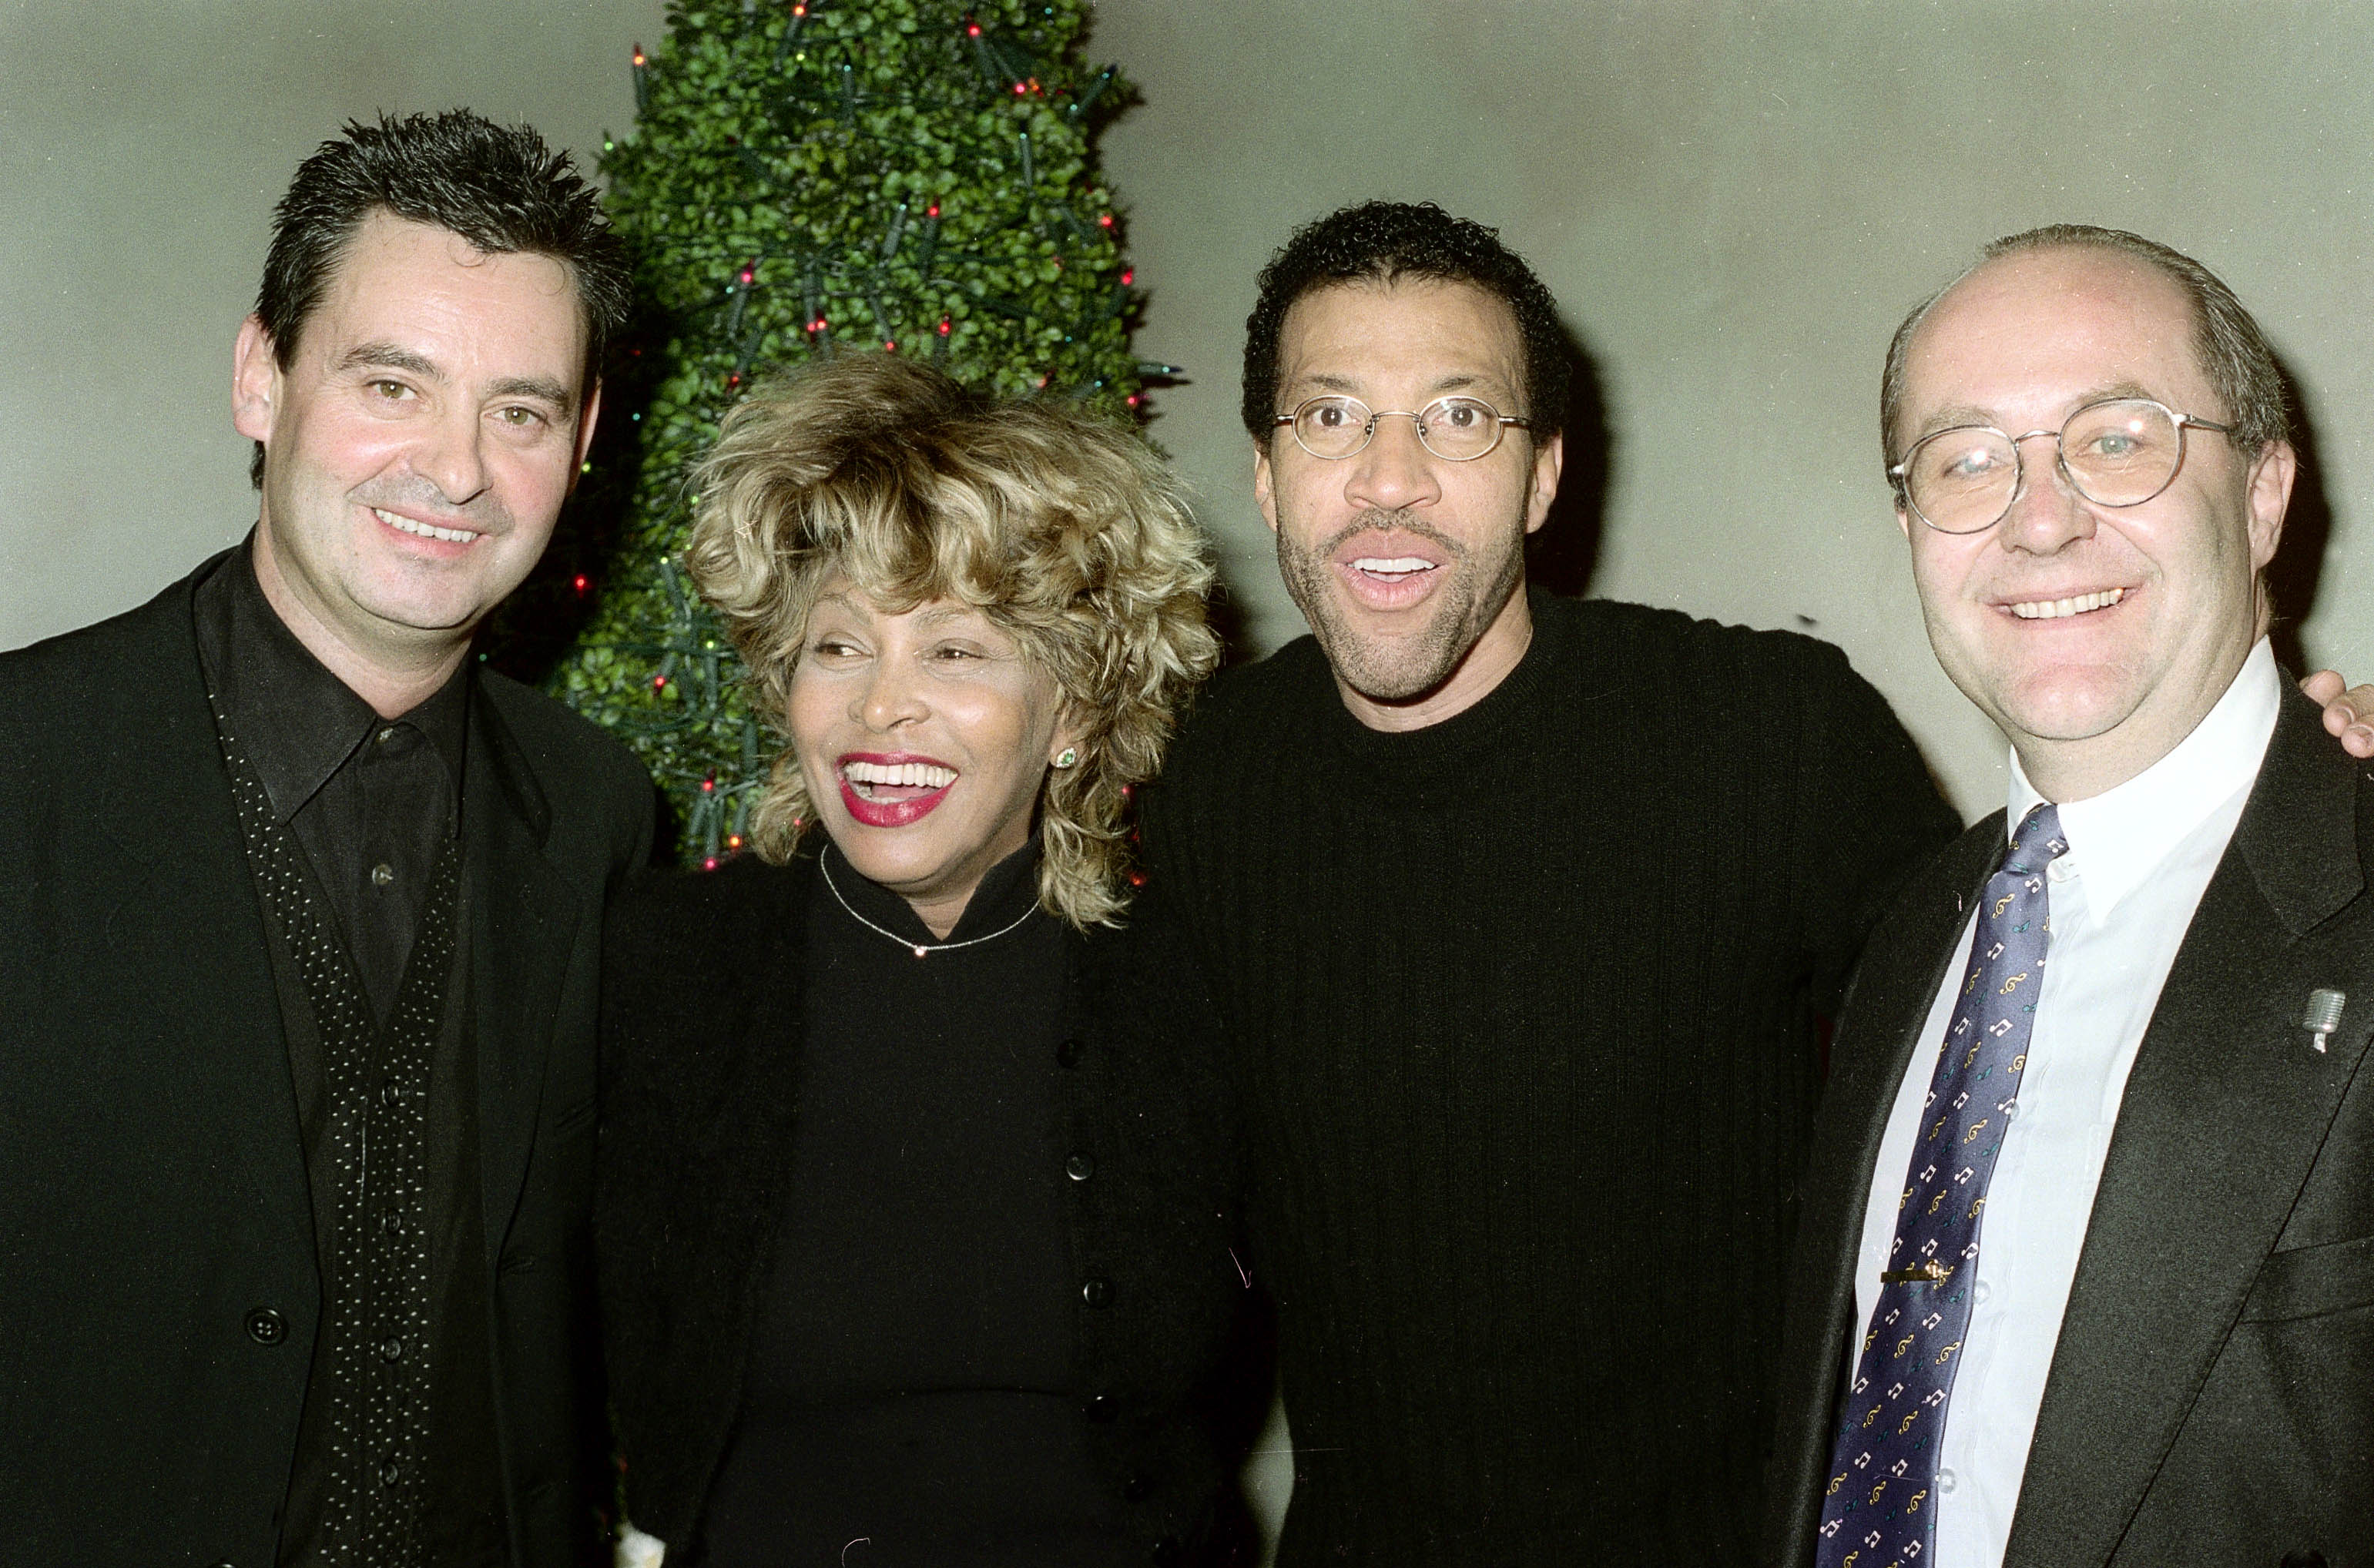 Erwin Bach, Tina Turner, Lionel Richie and Elias Fröhlich on November 28, 1998 | Source: Getty Images